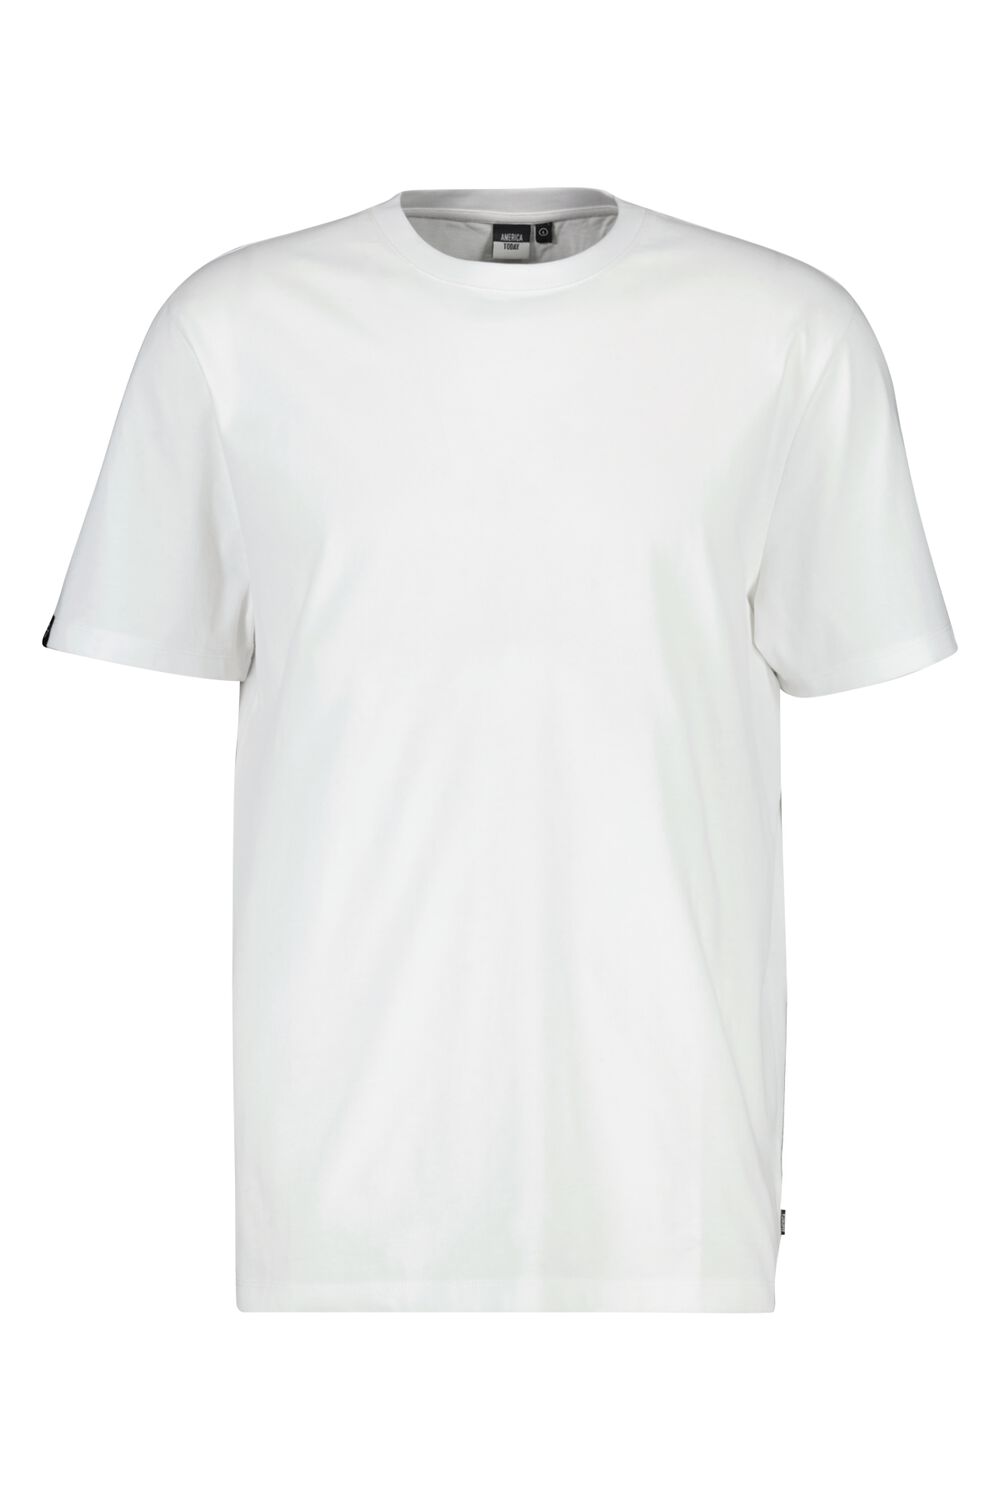 America Today regular fit T-shirt wit - Thumbnail 2